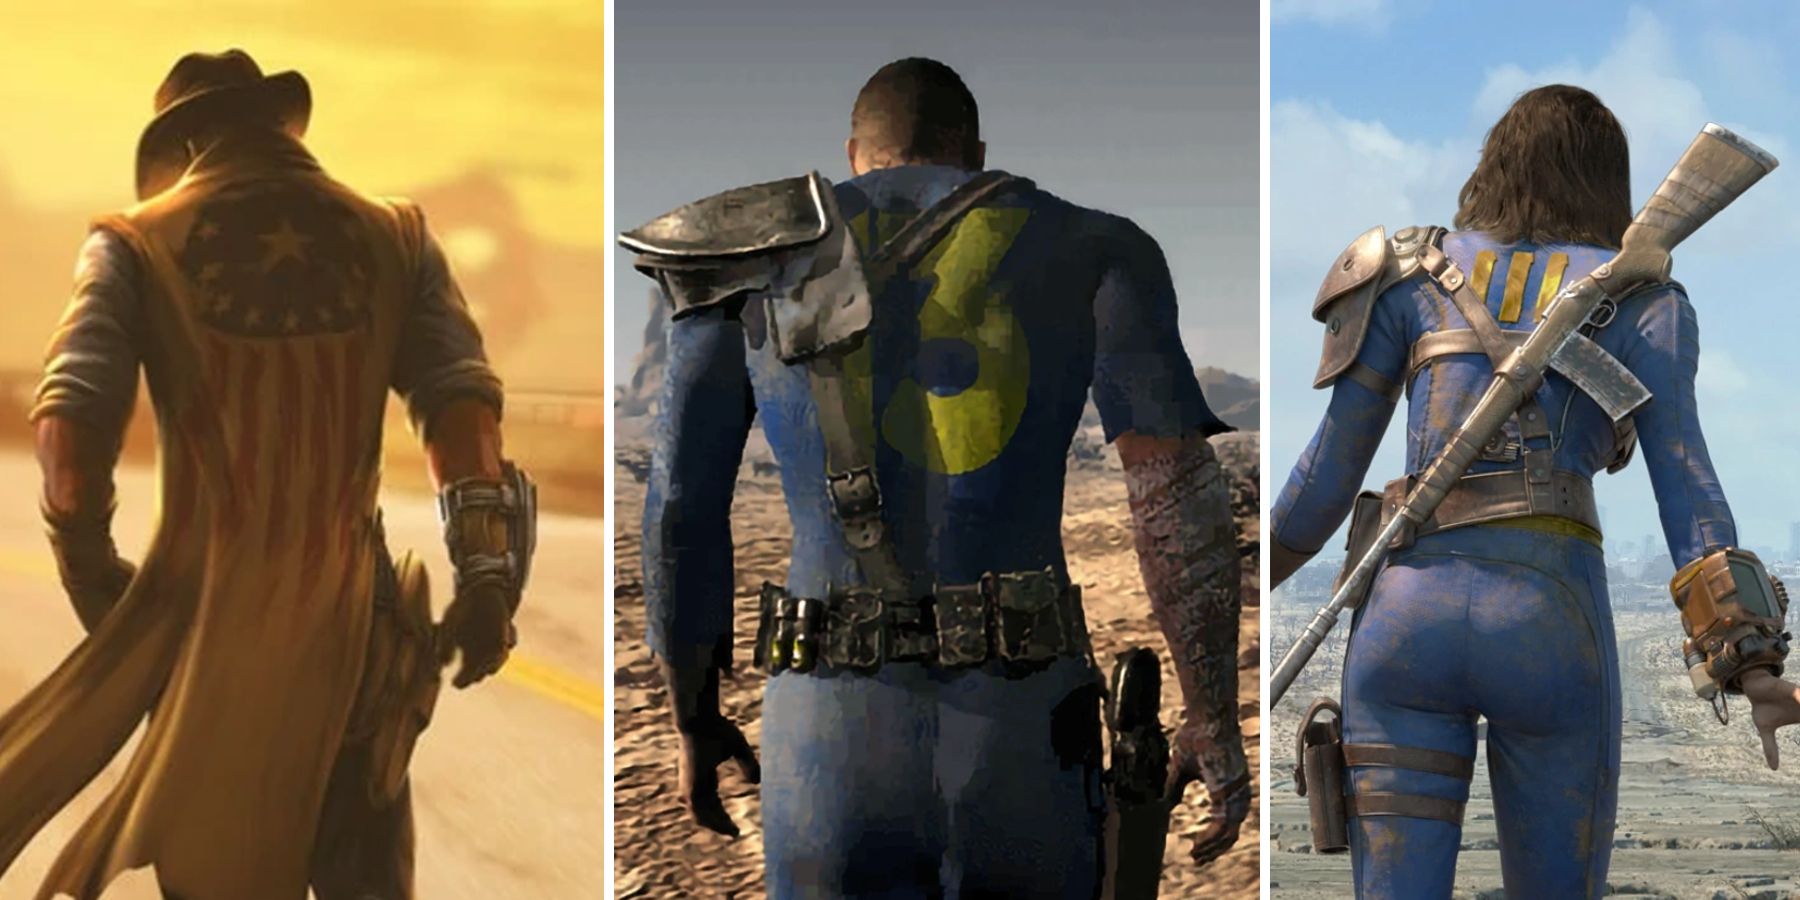 What Fallout 76 Is Important Fallout Game to the Series